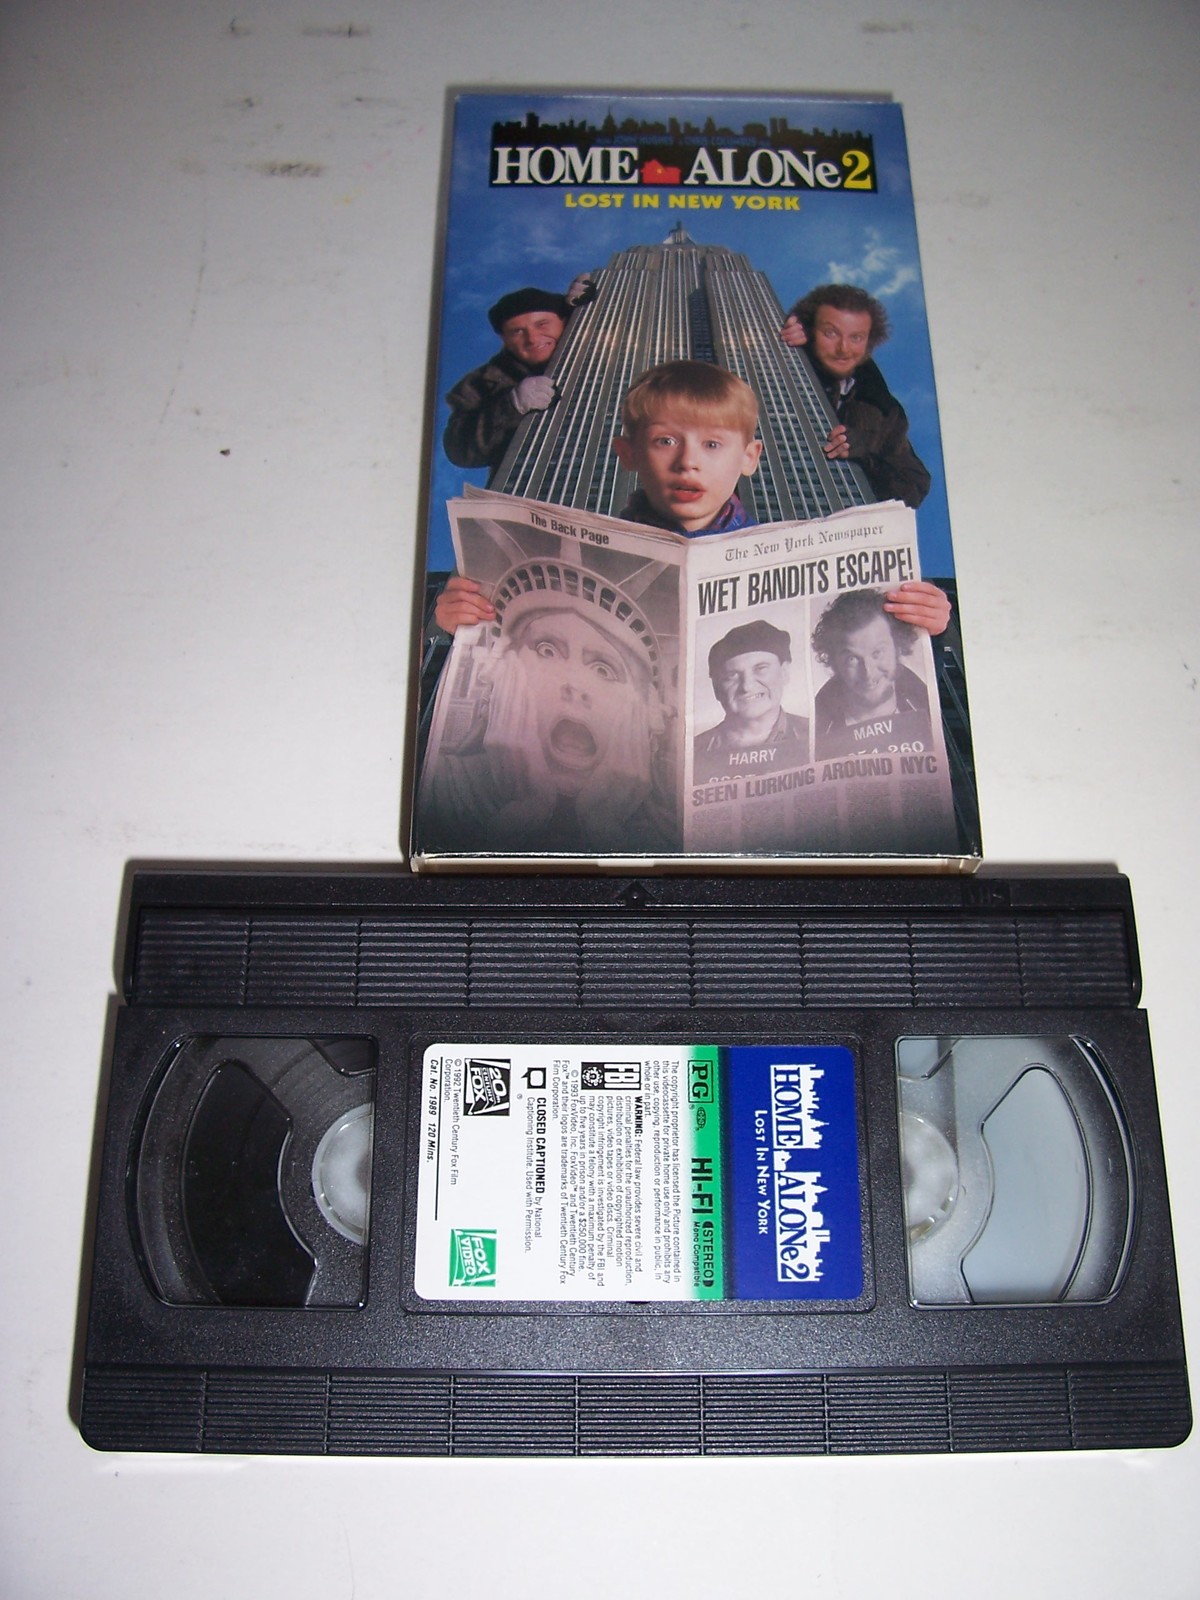 Home Alone 2 Vhs and 46 similar items